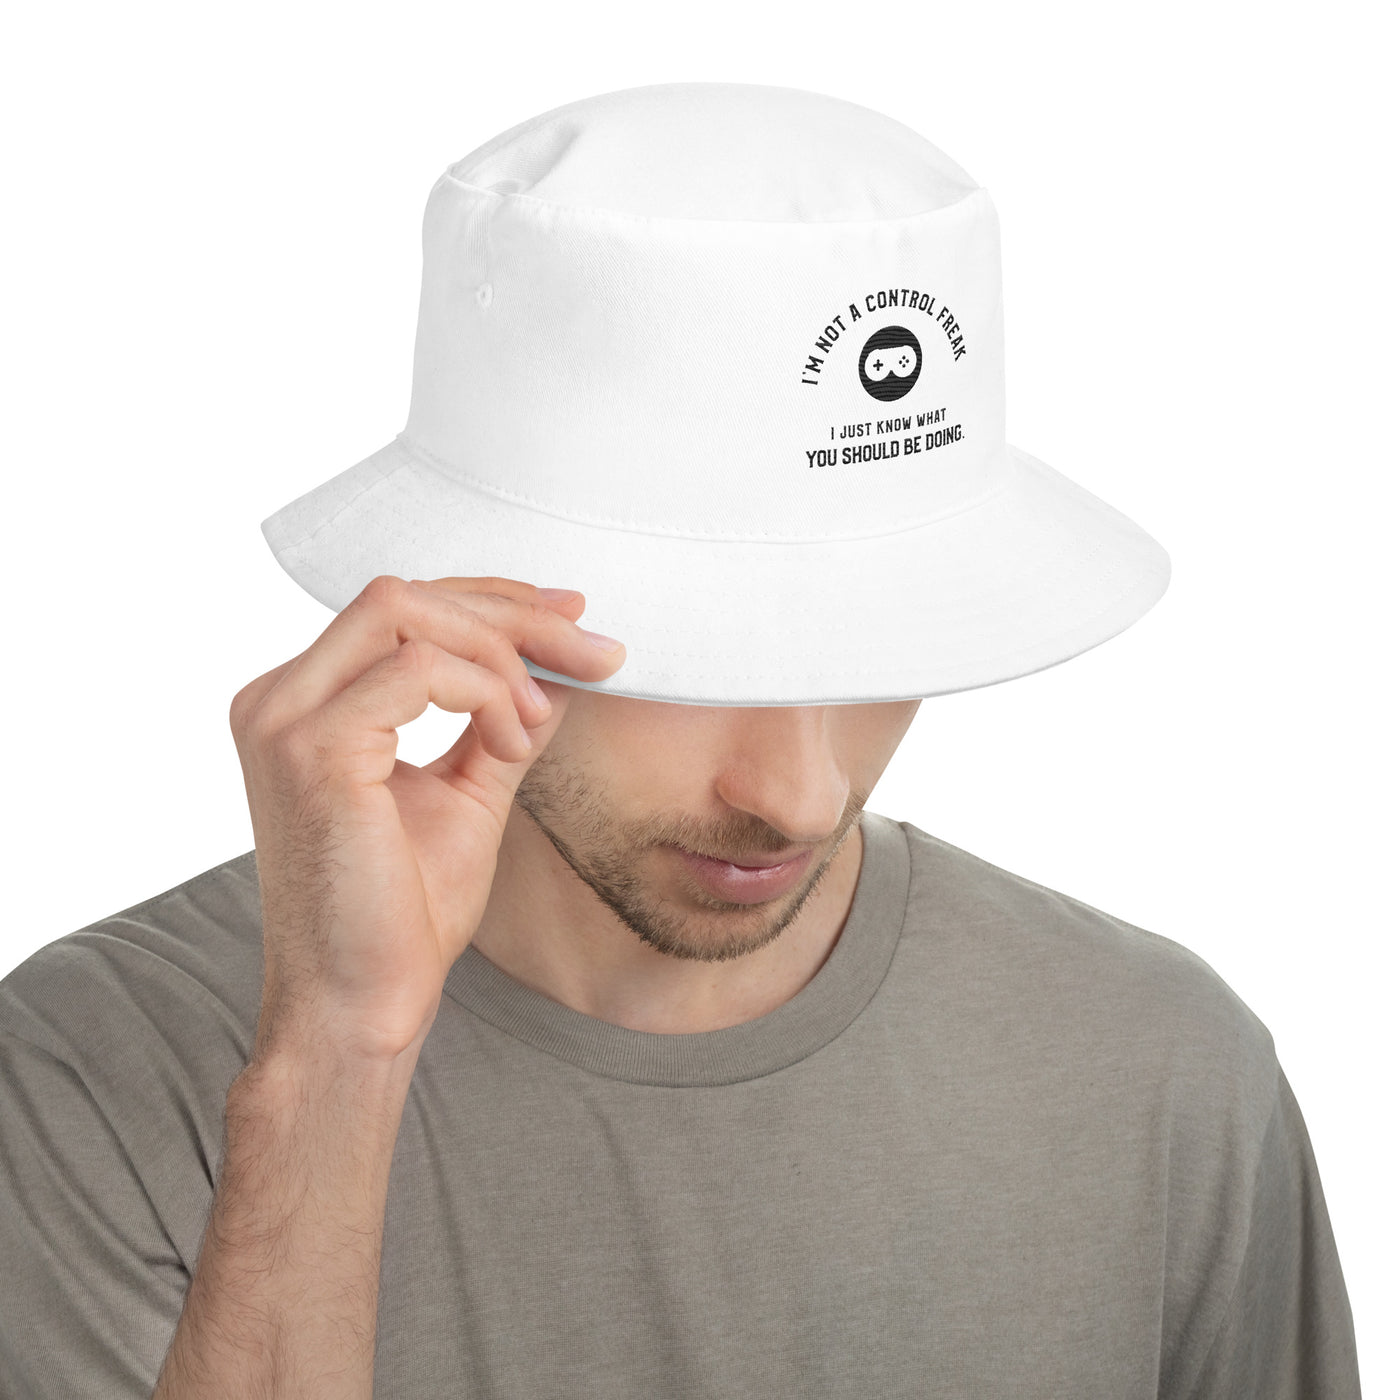 I am not a Control freak, I just Know what you should be doing - Bucket Hat